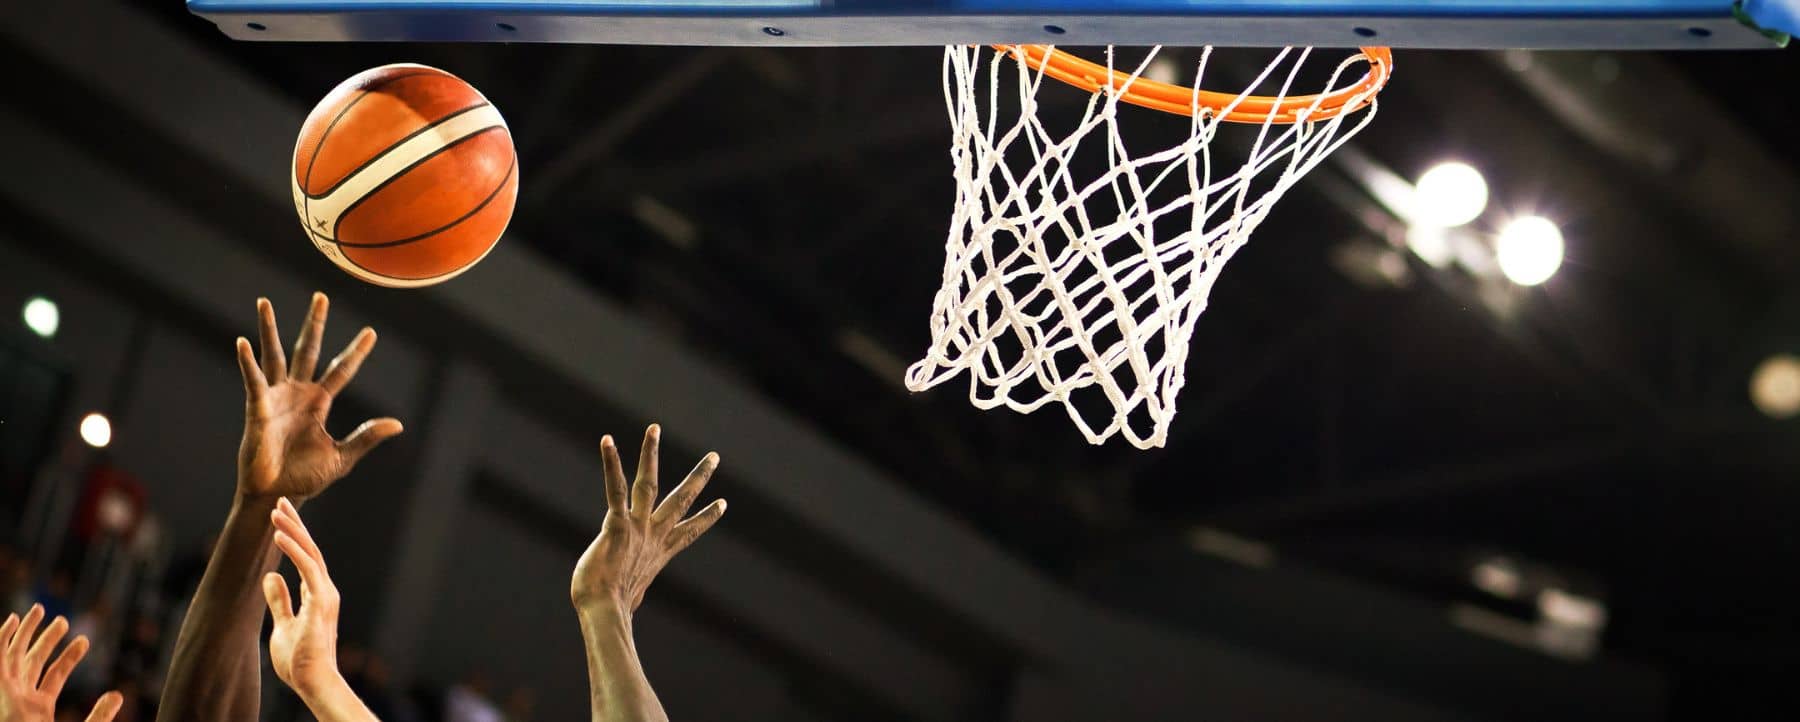 Close up of a basketball hoop and multiple hands reaching for an airborne basketball